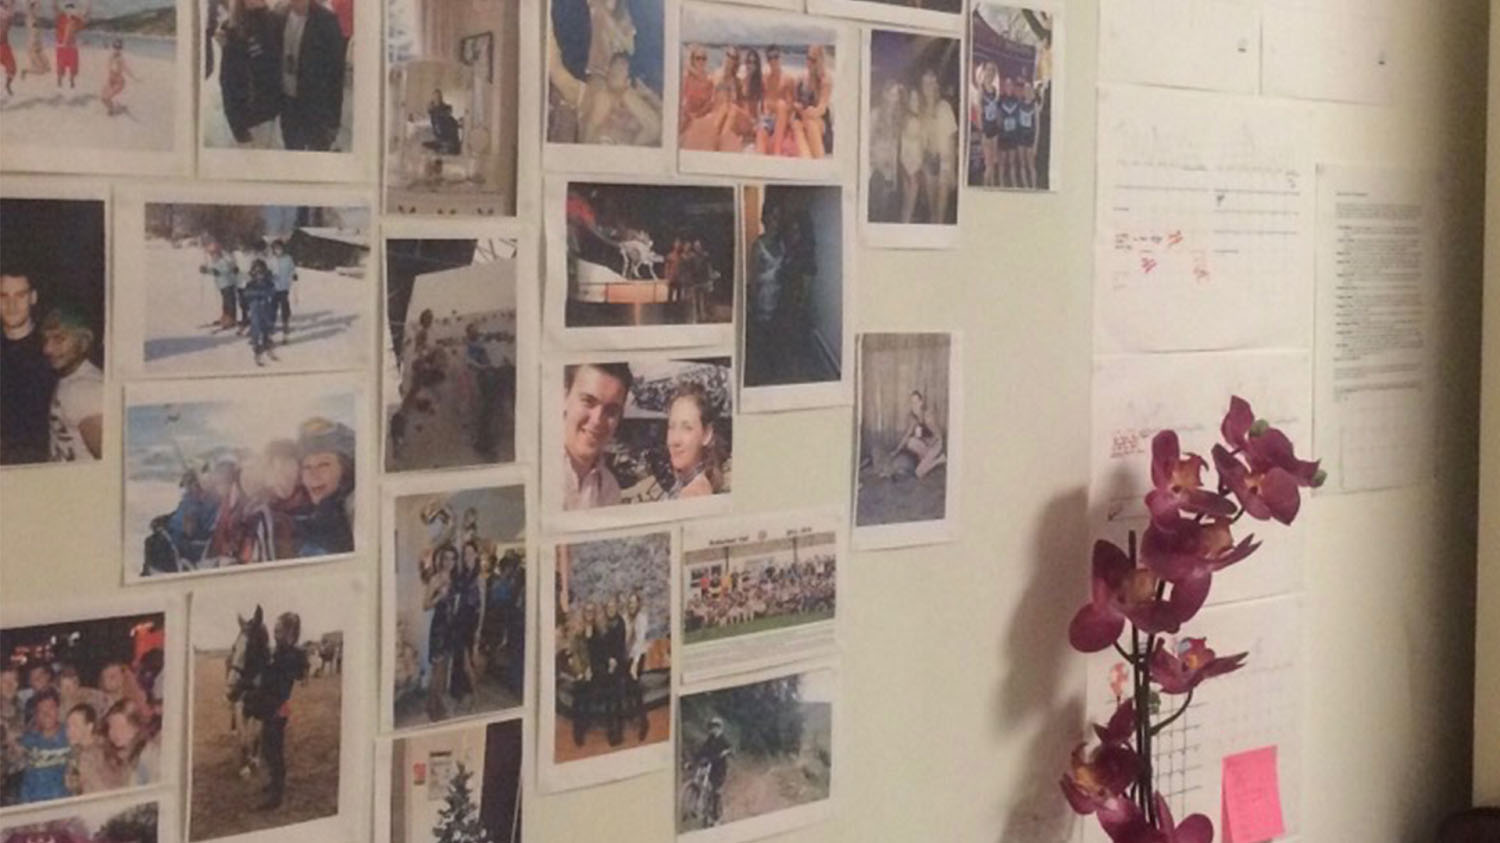 Imogen's wall in her university room which has photos of her with friends on it. 